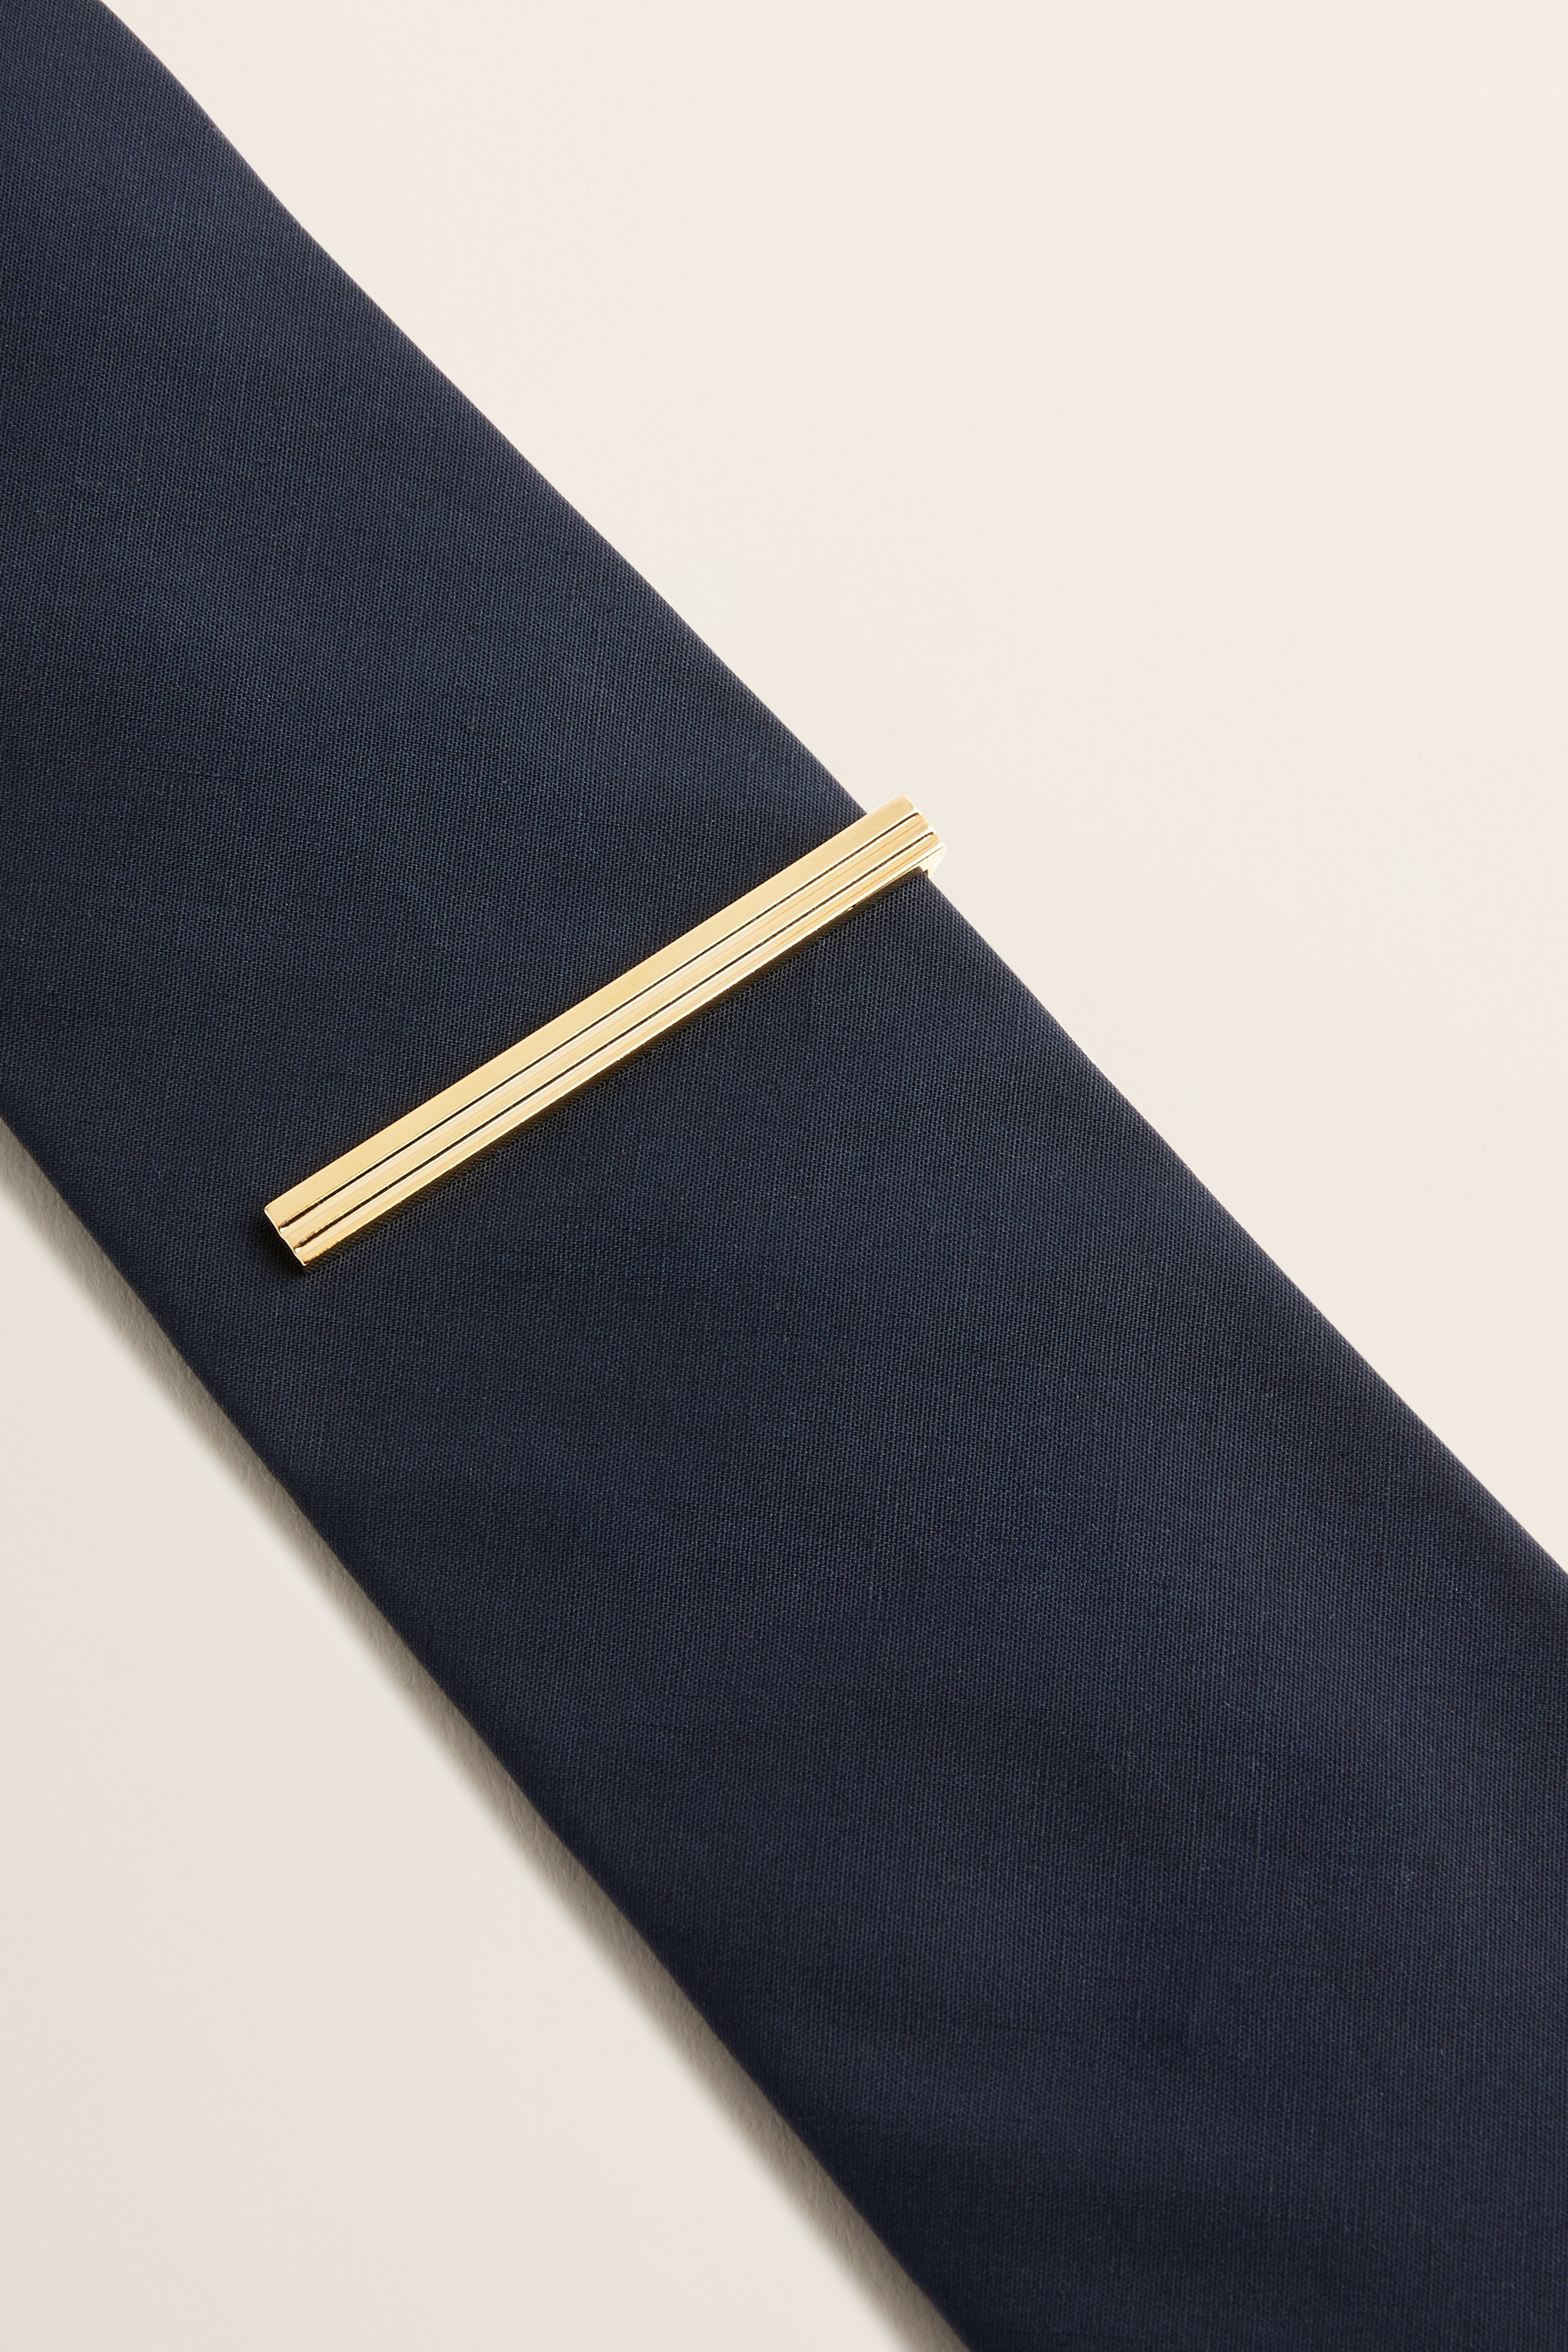 Tie Tack - Gold Brushed